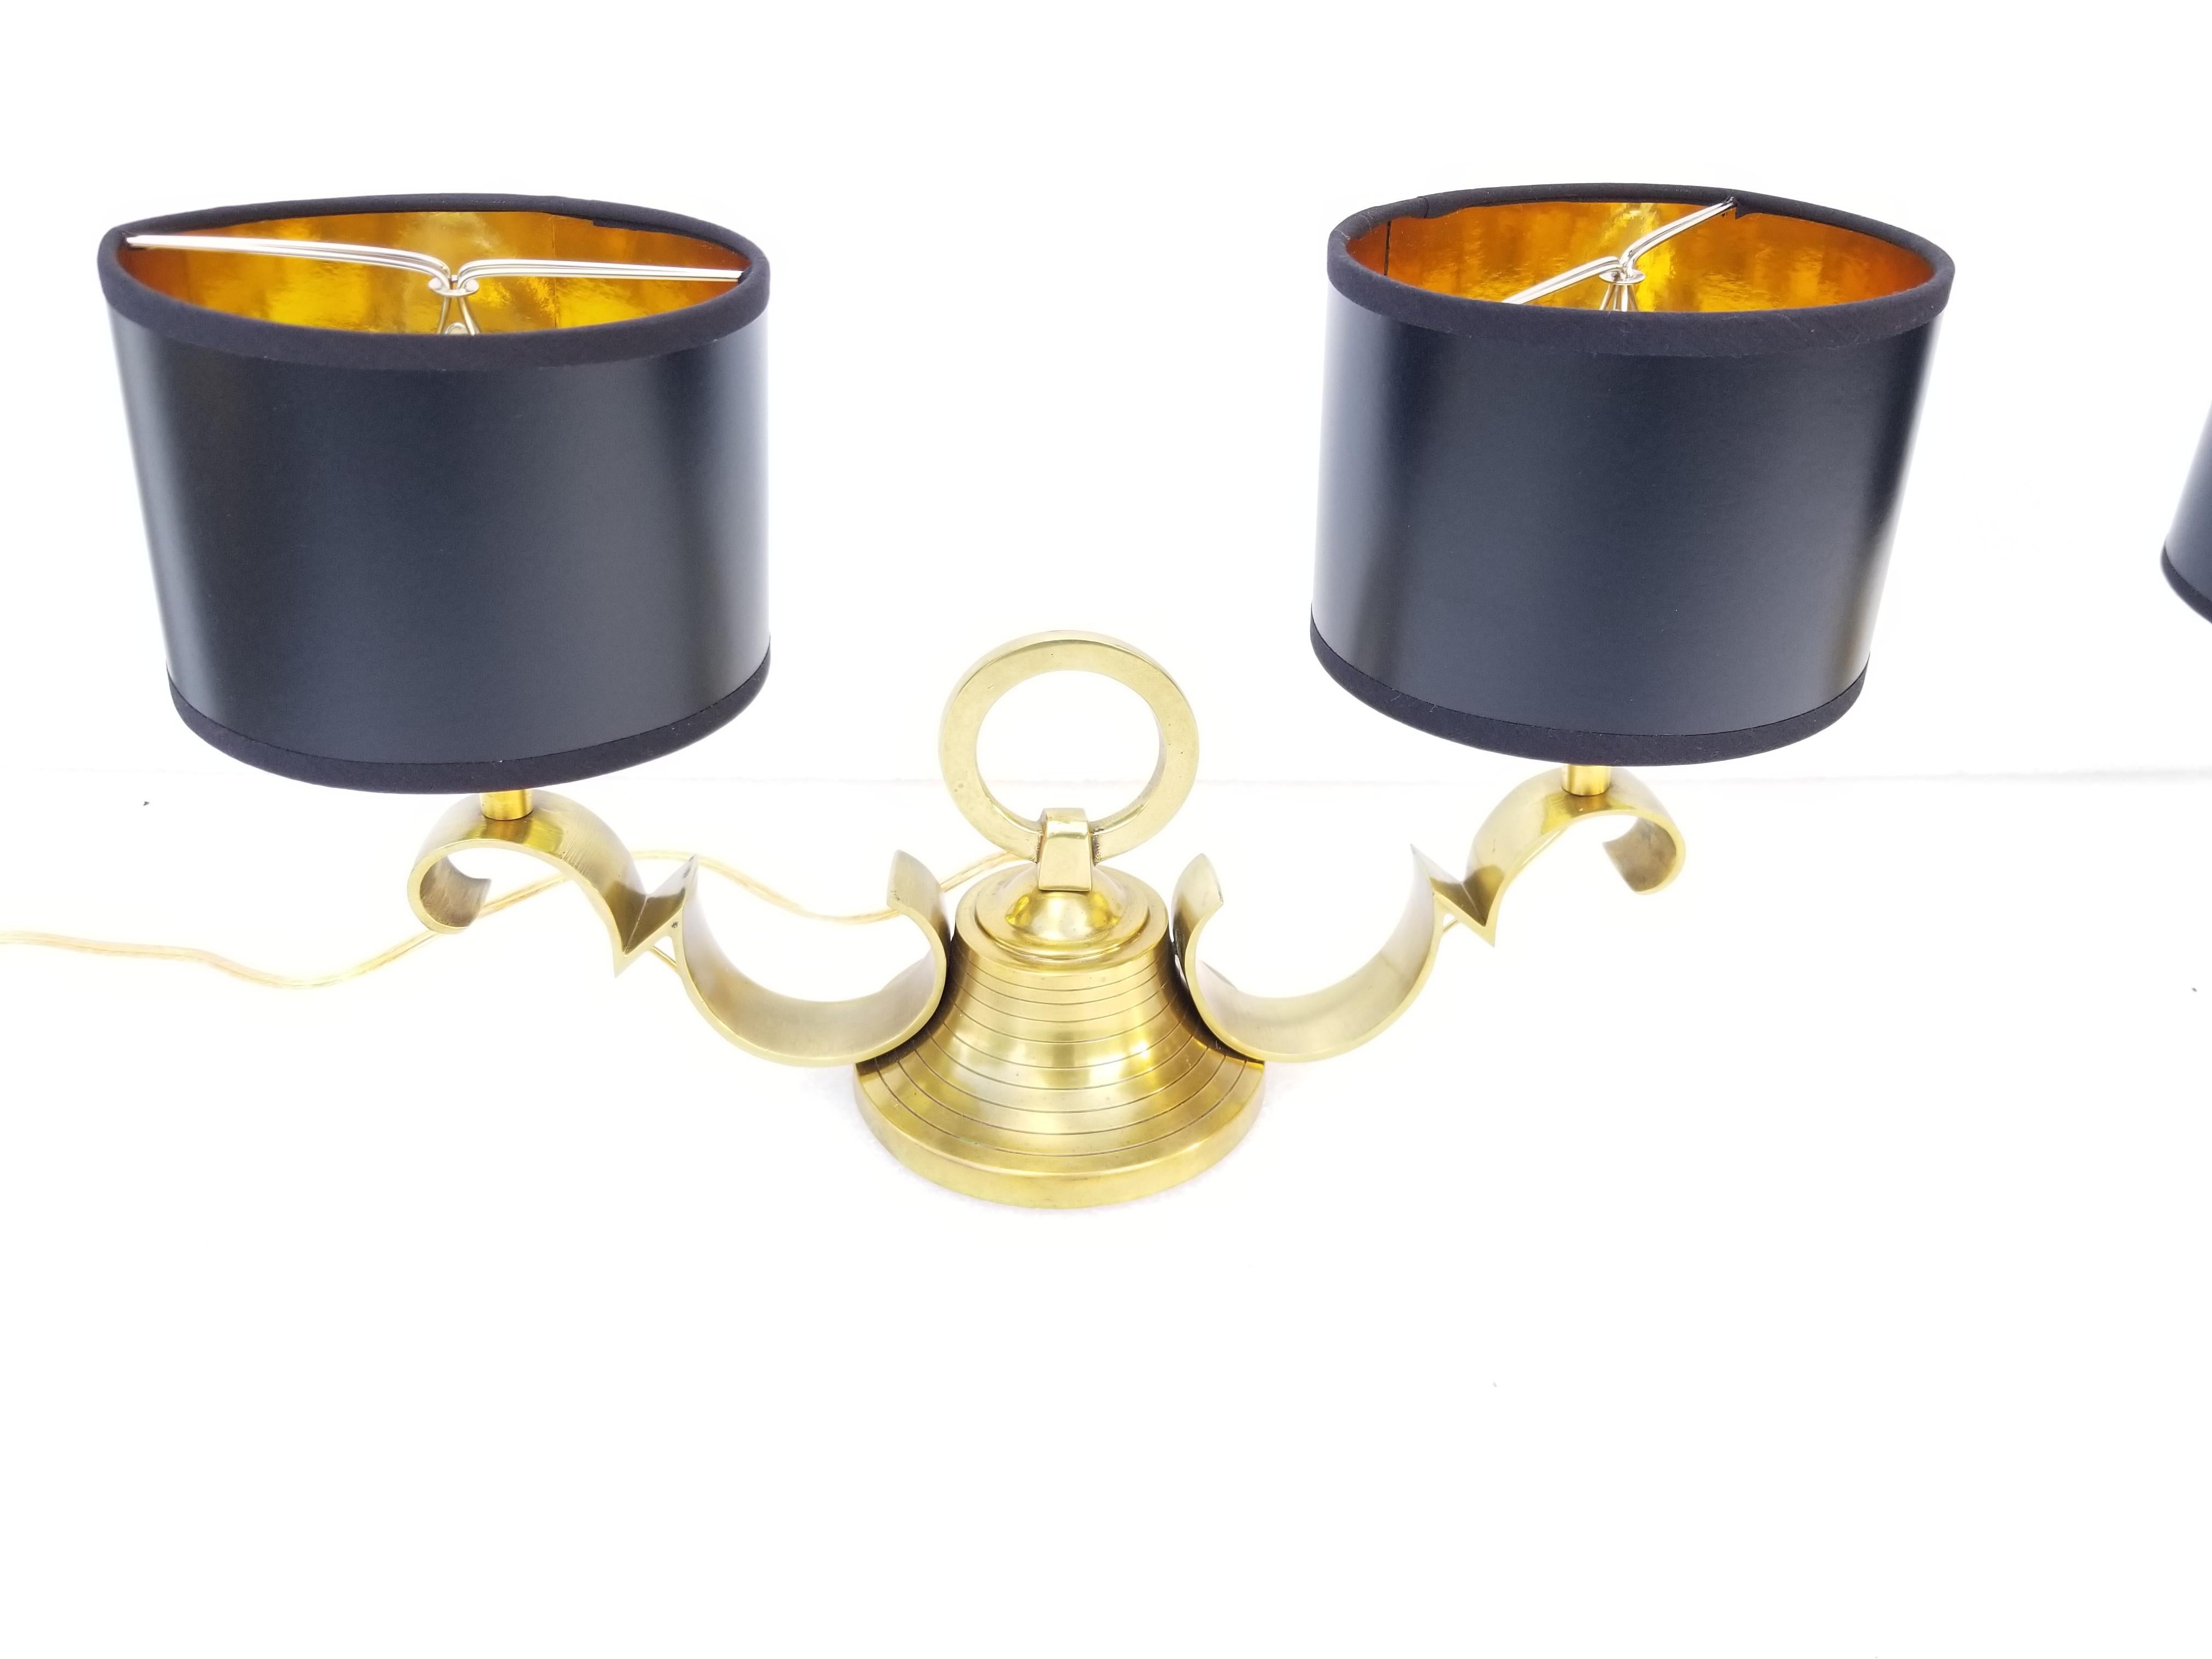 Pair of Jacques Adnet style table lamp, polished brass, 2-light 40 watts max bulb.
US rewired.